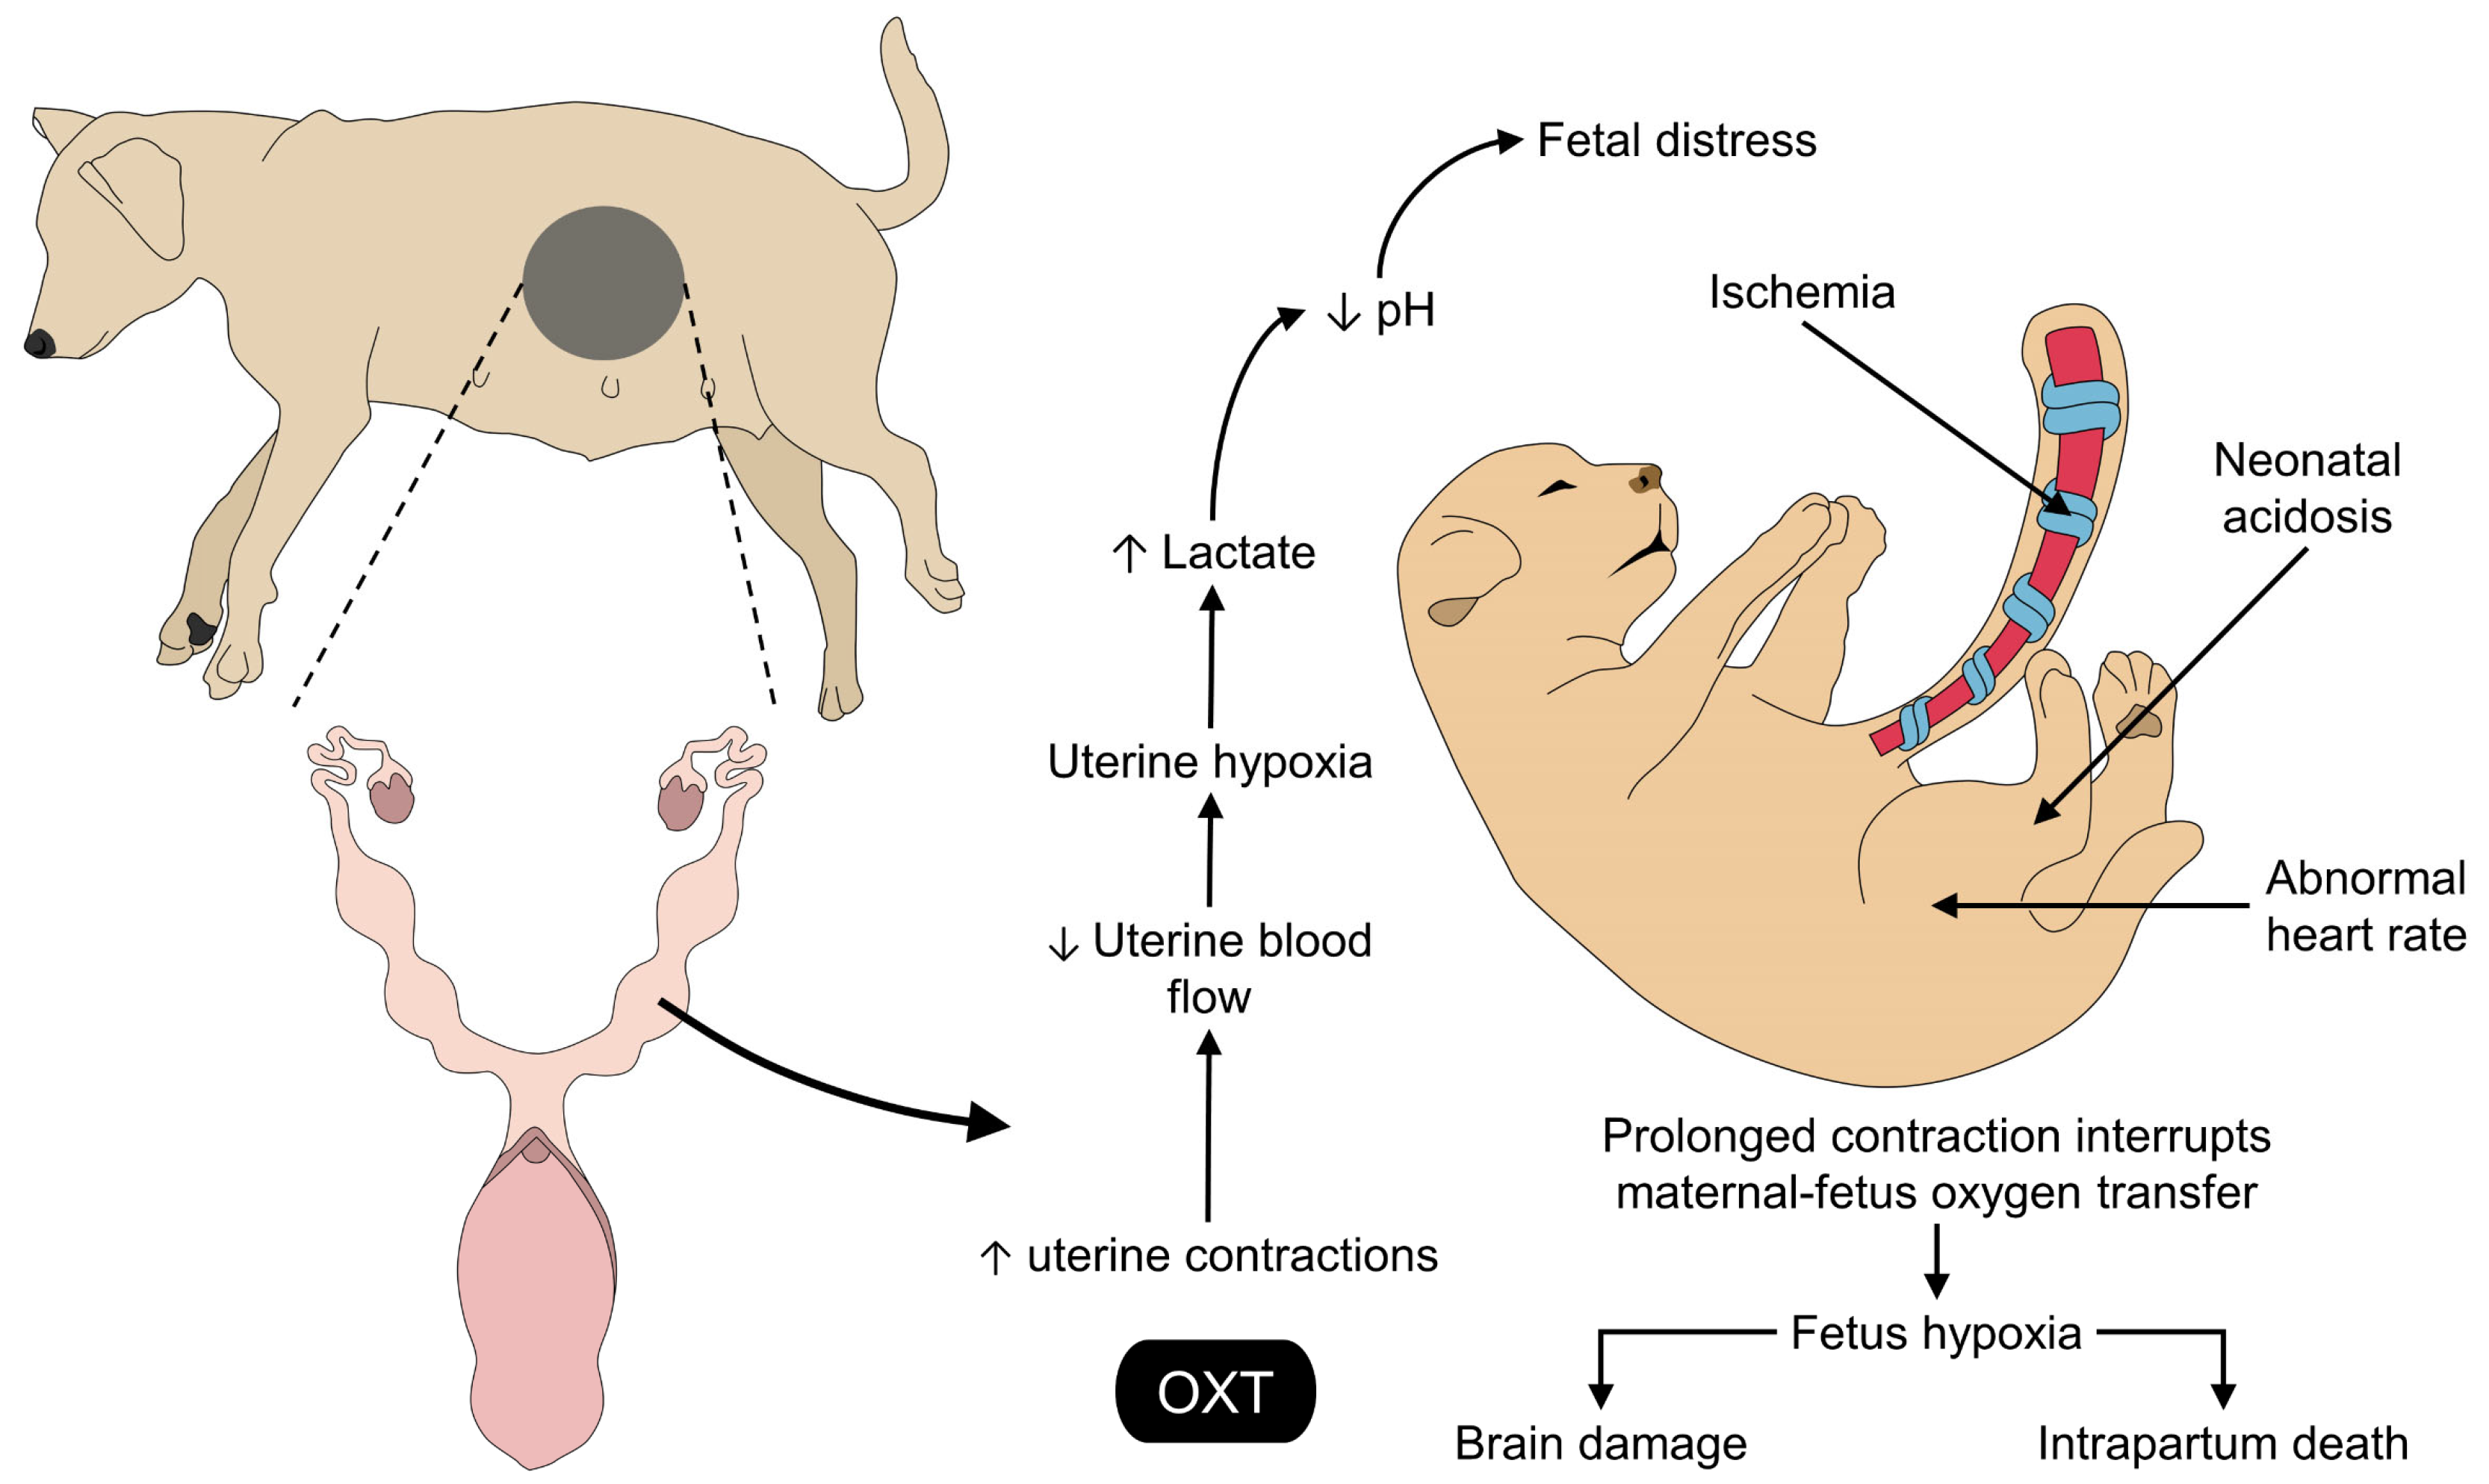 what does oxytocin do to dogs